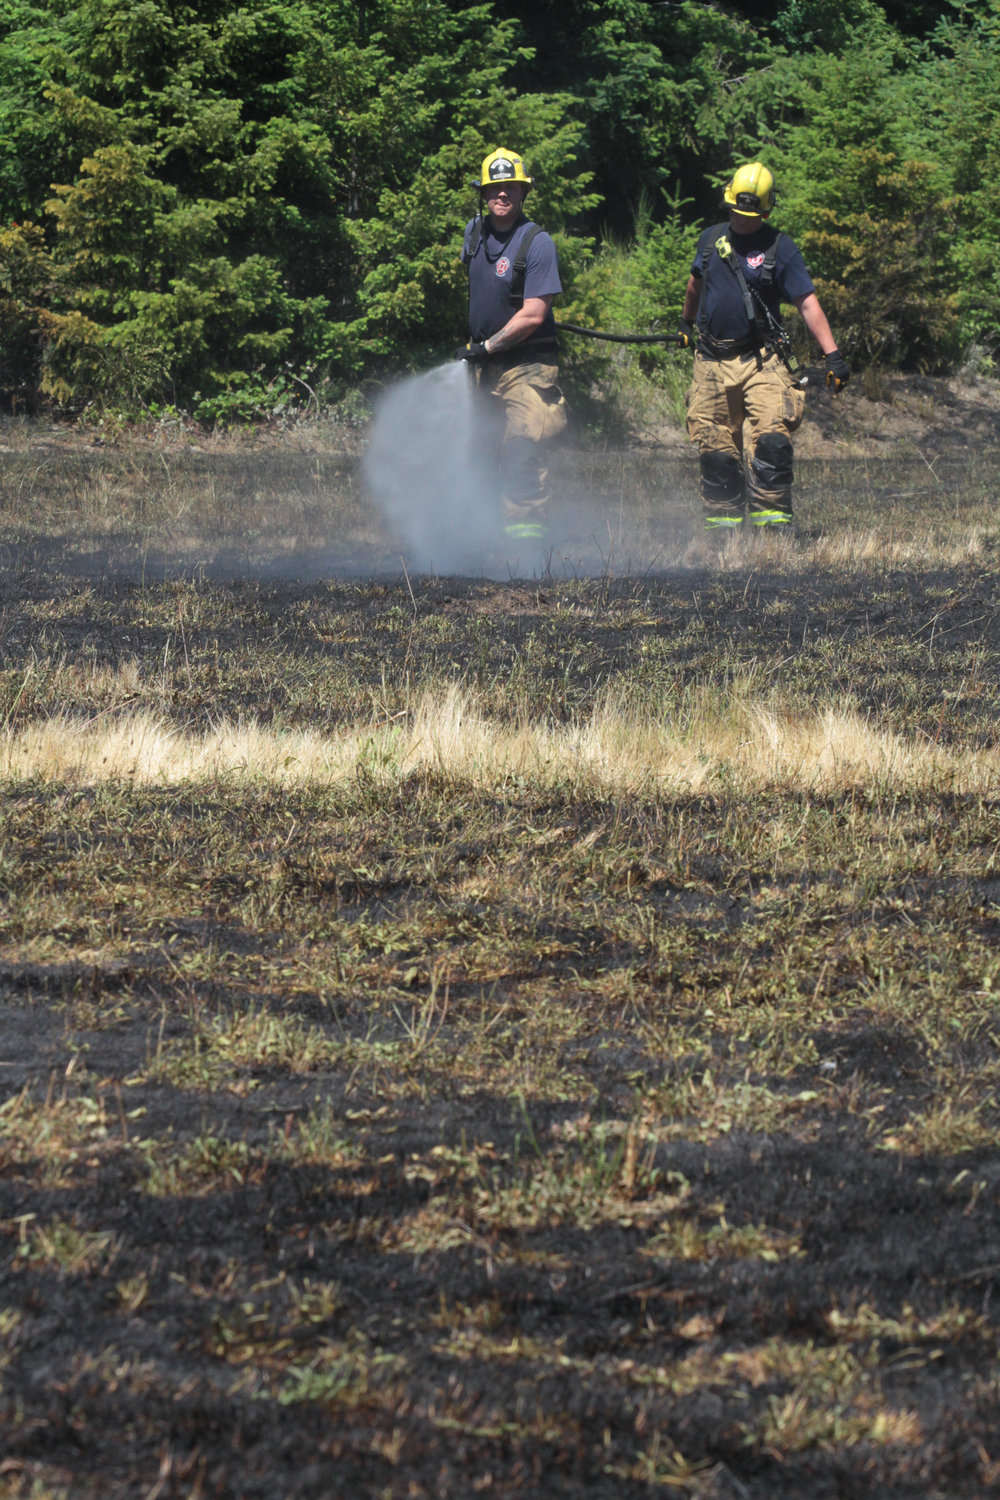 East Jefferson firefighters put out a grass fire Friday afternoon on a vacant lot next to the Jefferson Public Library. The fire was set off by children playing with fireworks, according to the Jefferson County Sheriff’s Office. Only two other major fires were reported during the heat spell; a fire at a logging site in Brinnon over the weekend, and a brush fire on Bee Mill Road north of Brinnon Monday.